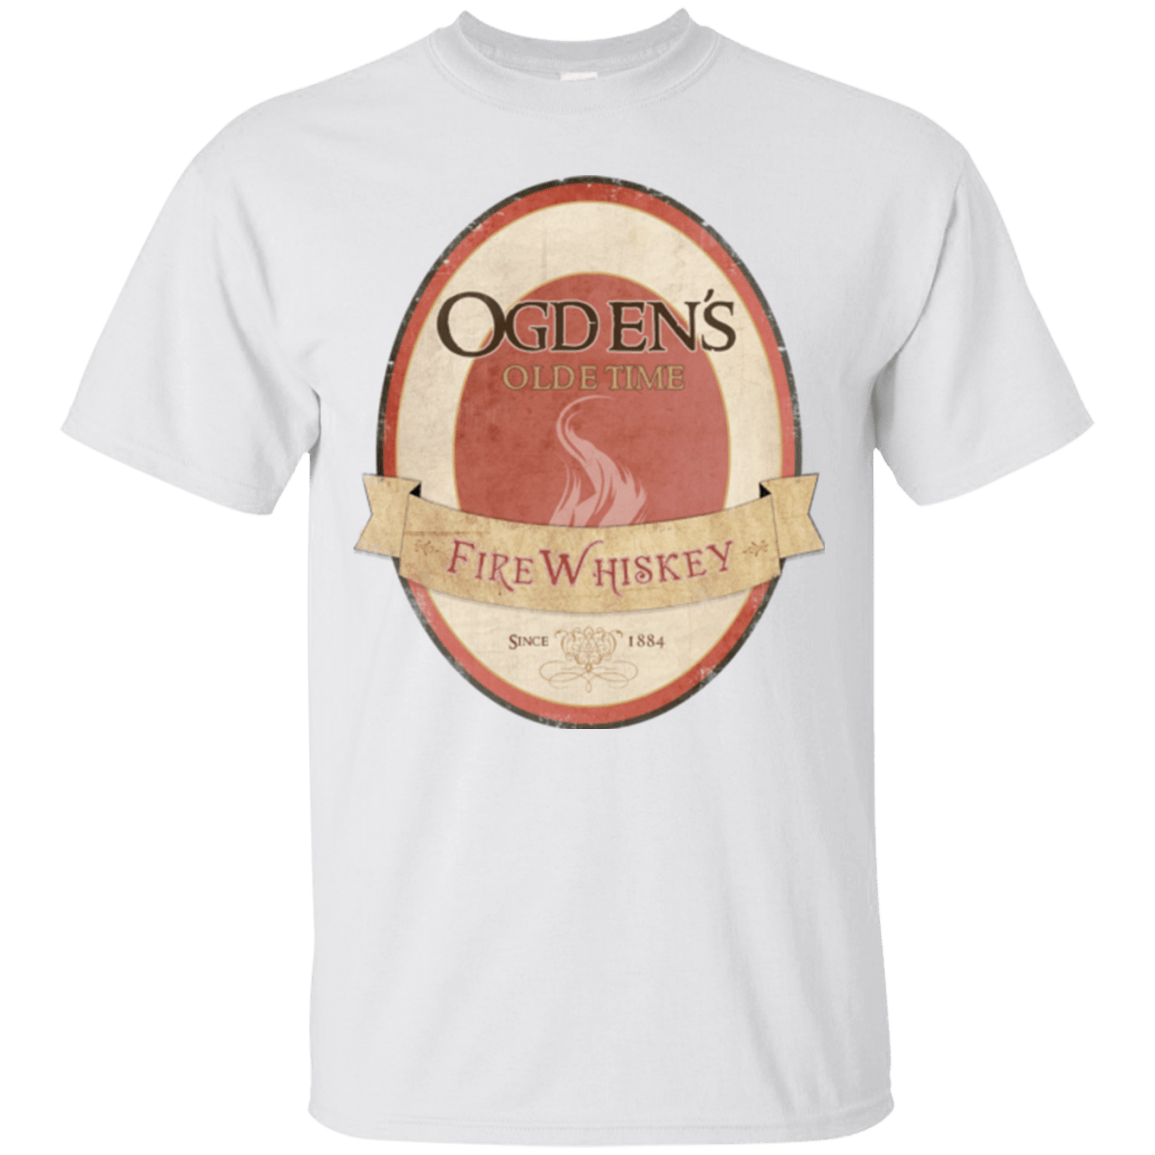 T-Shirts White / Small Ogdens Fire Whiskey T-Shirt